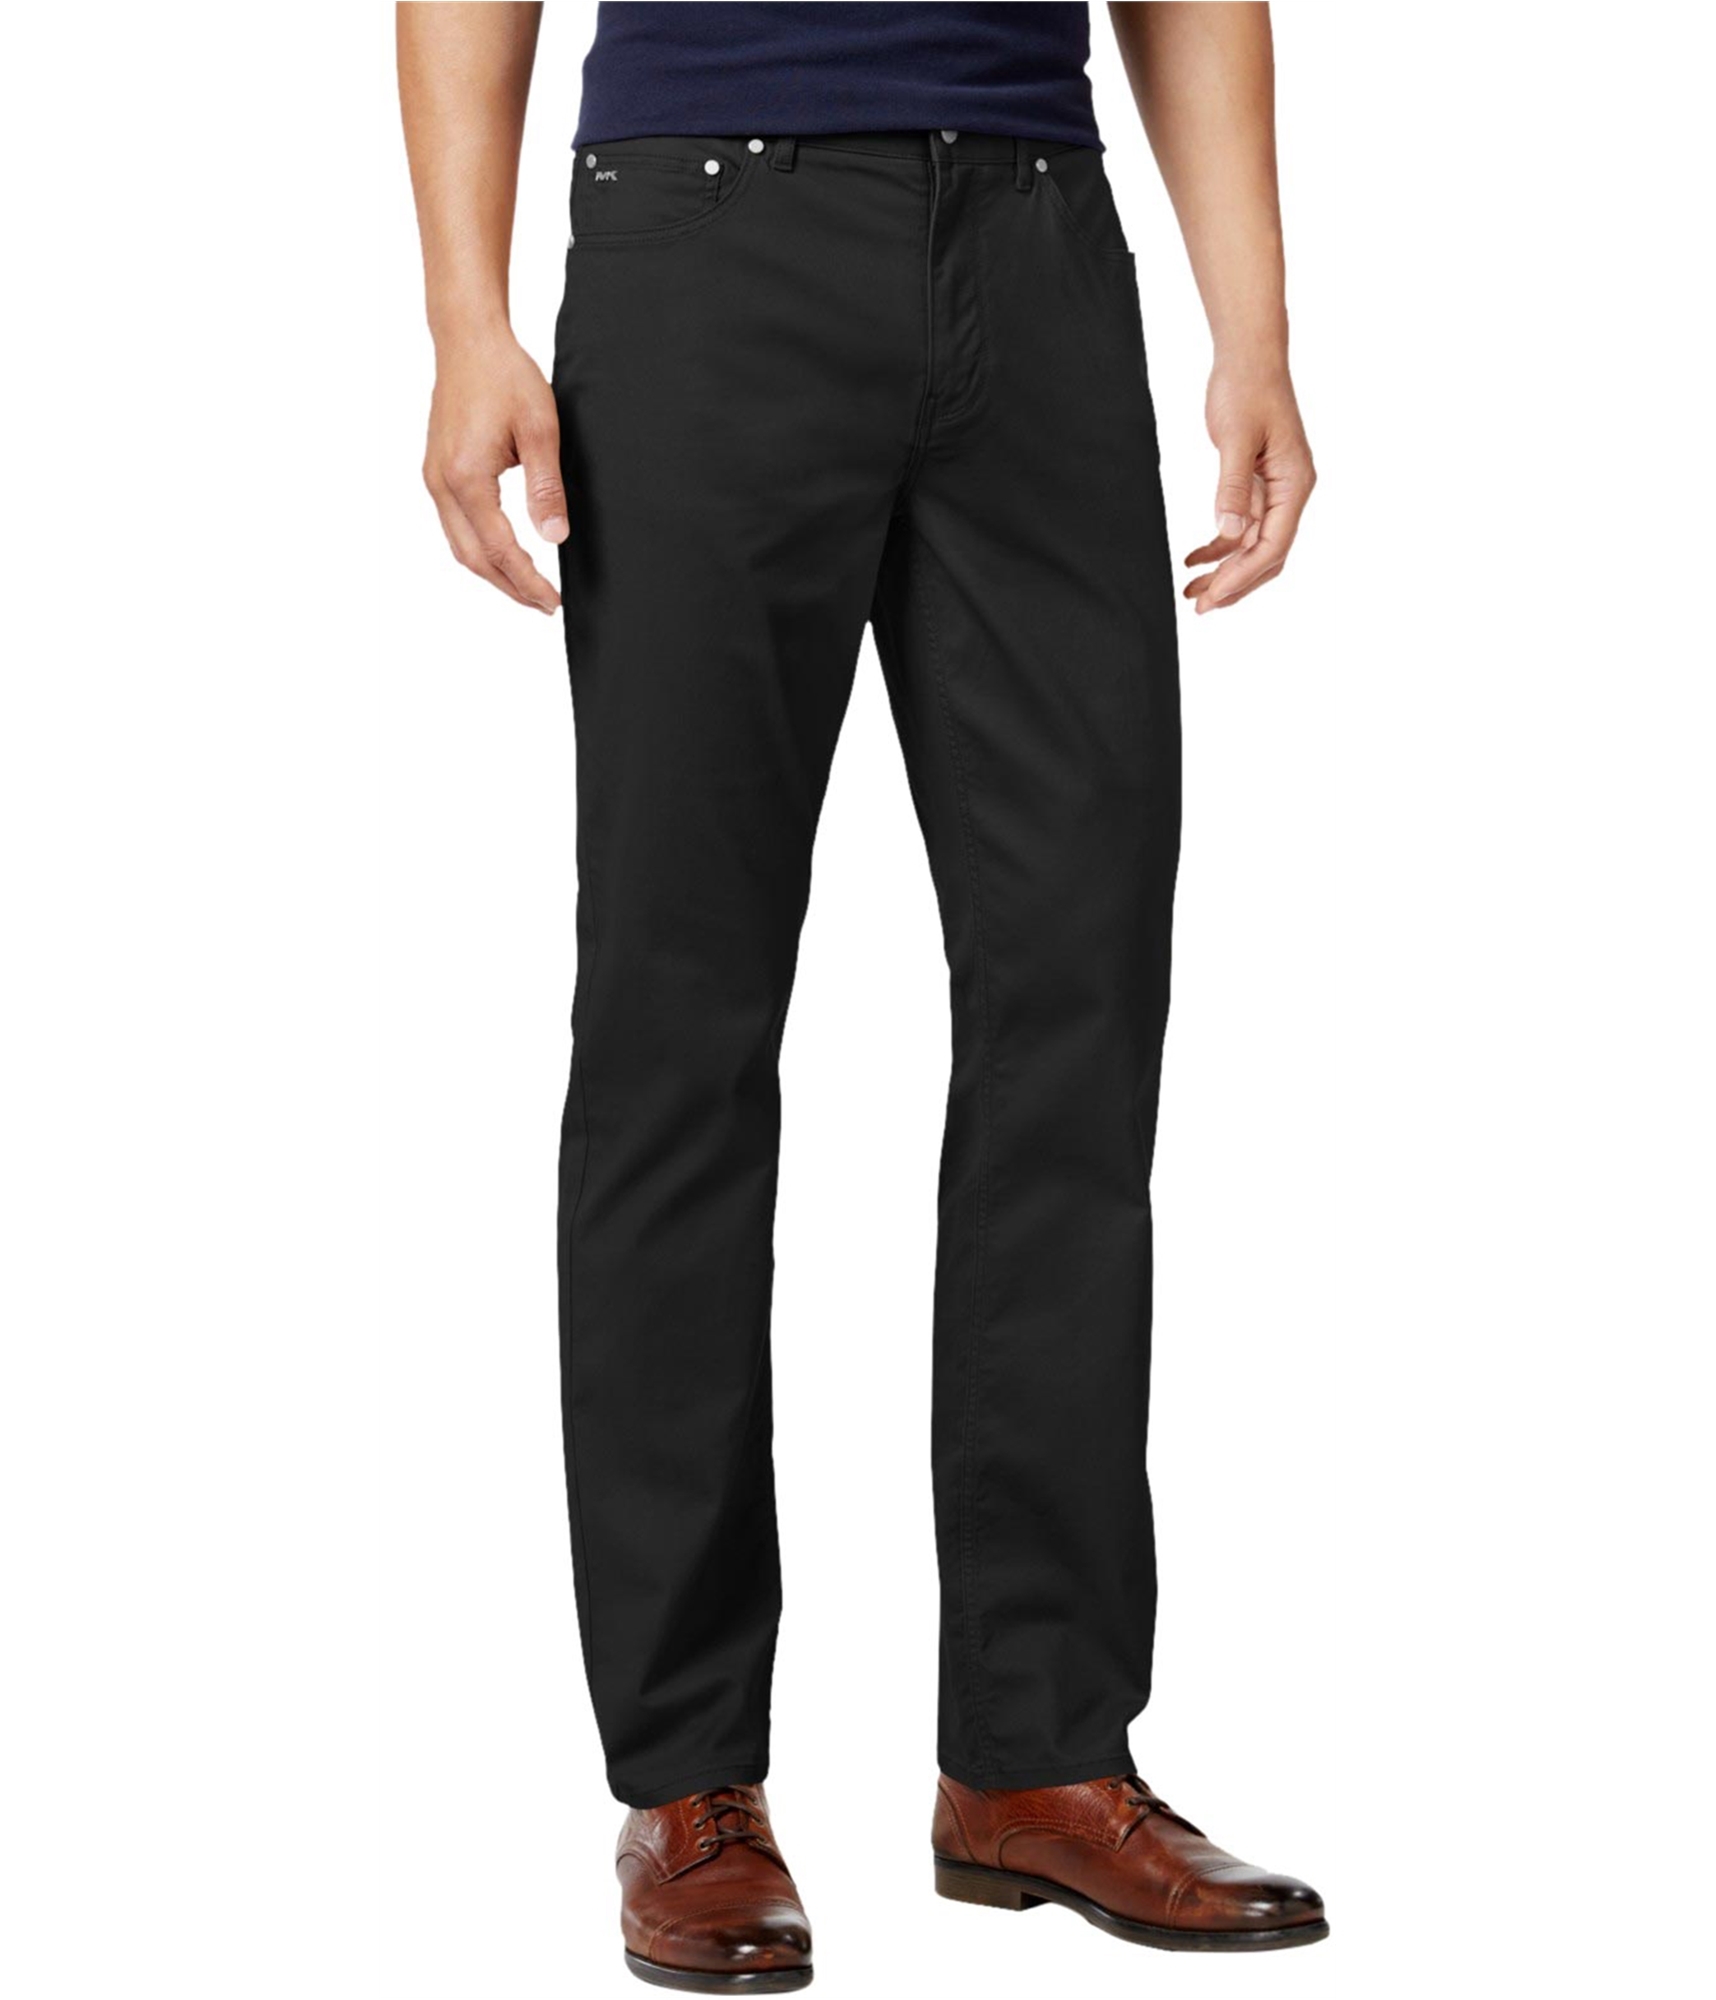 Buy a Michael Kors Mens Stretch Casual Chino Pants | Tagsweekly